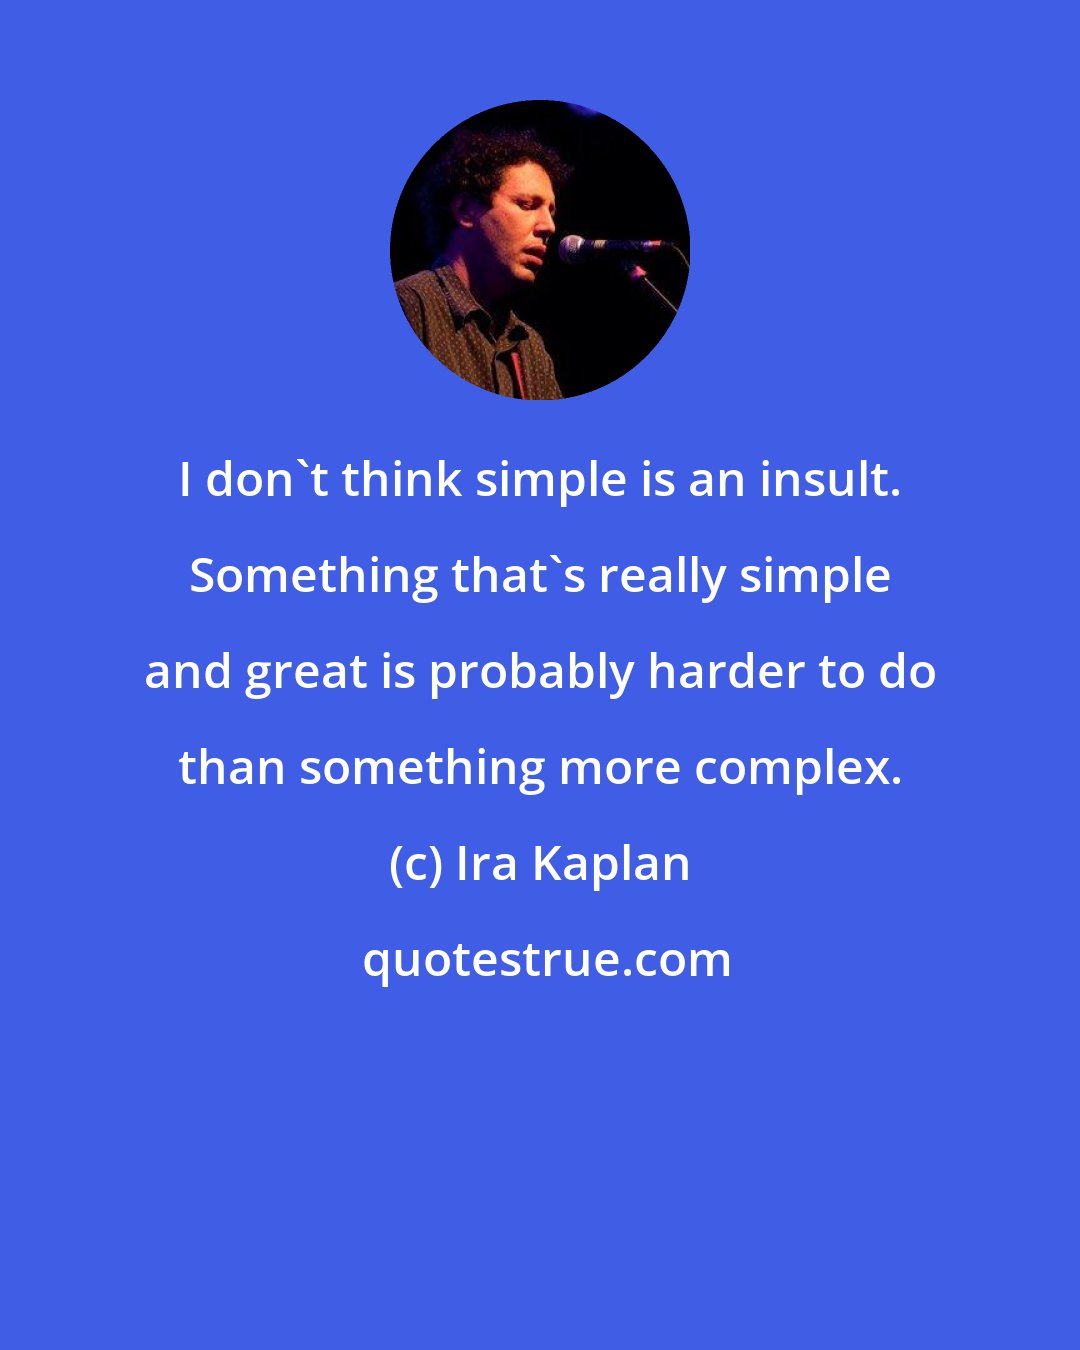 Ira Kaplan: I don't think simple is an insult. Something that's really simple and great is probably harder to do than something more complex.